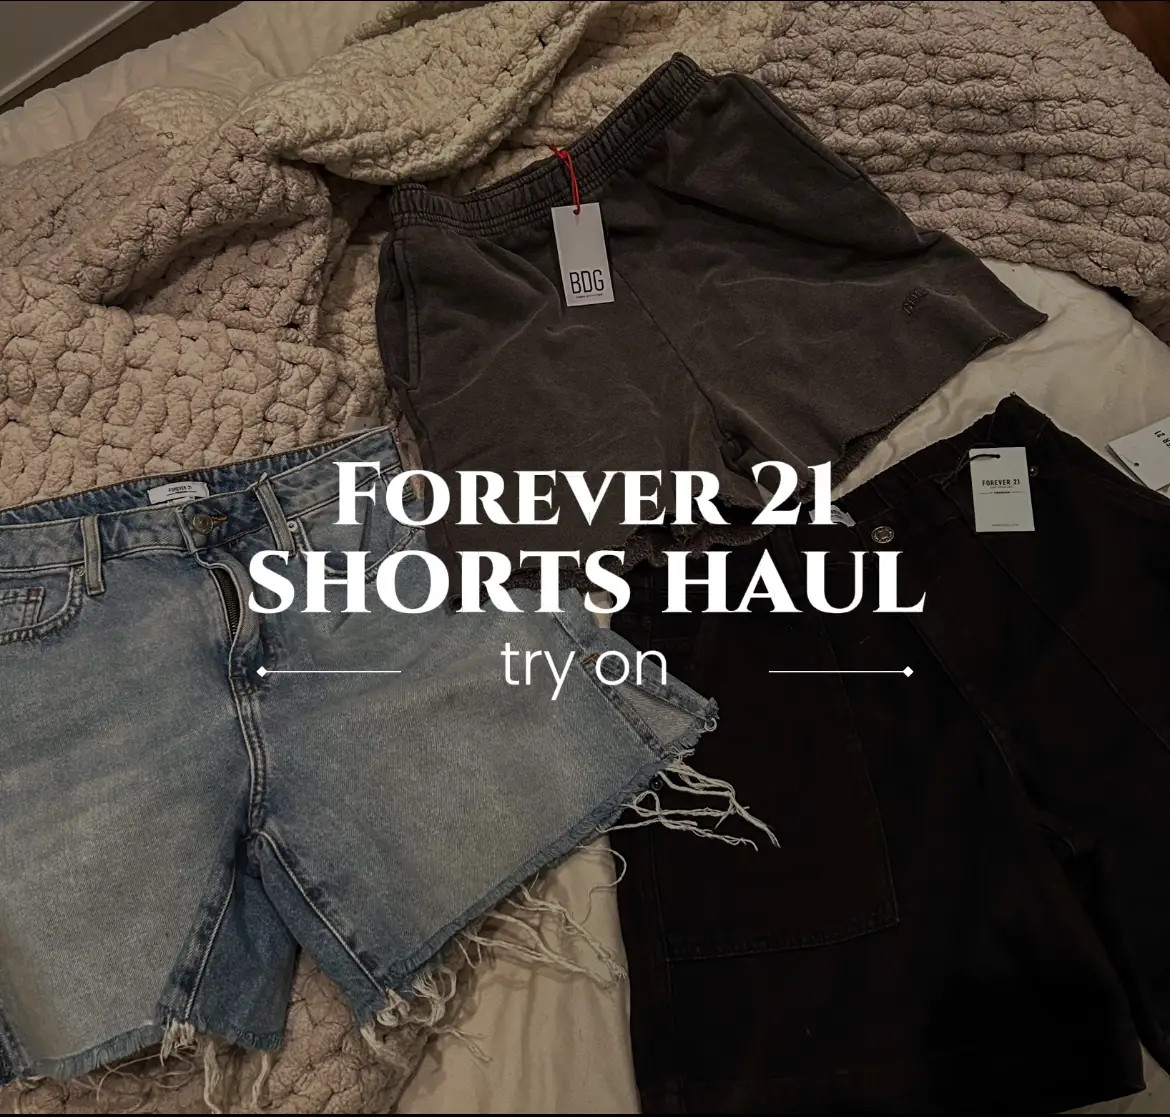 Shop with me for cute summer outfits at Forever 21! 💖 I fell in love